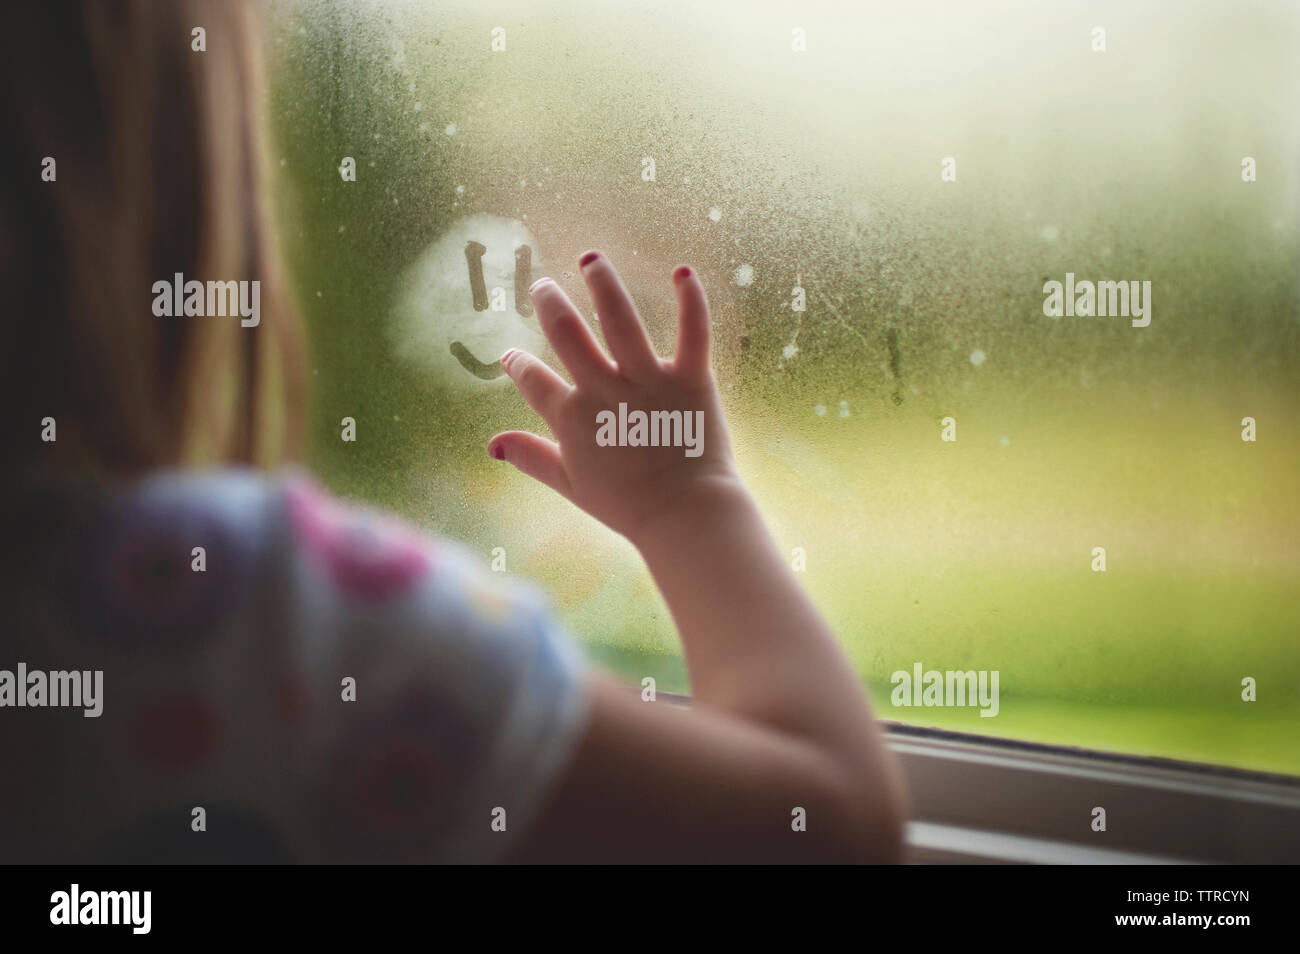 Cropped image of girl making anthropomorphic smiley face on wet window at home during rainy season Stock Photo